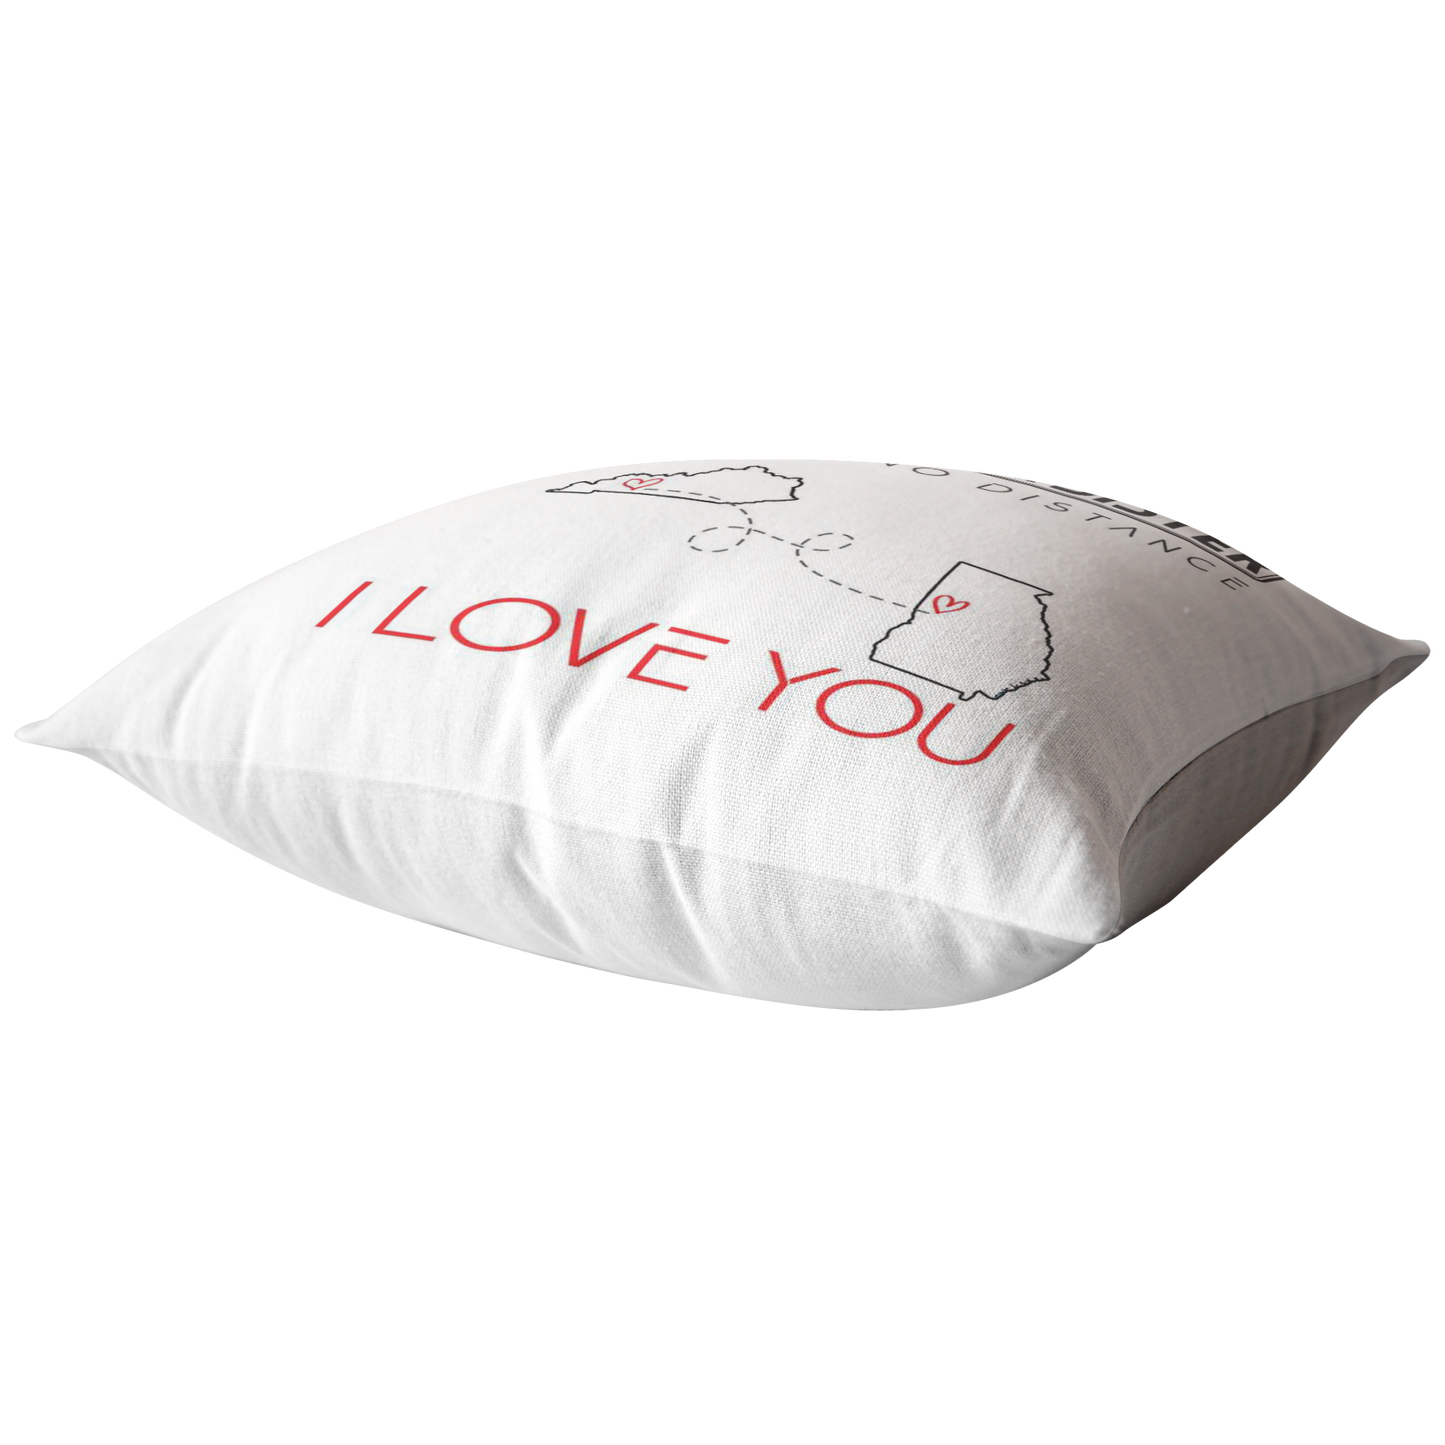 ND-pl20419438-sp-40115 - [ Kentucky | Georgia | Brother And Sister ] (PI_ThrowPillowCovers) Happy Decoration Personalized - The Love Between Mother/Fath